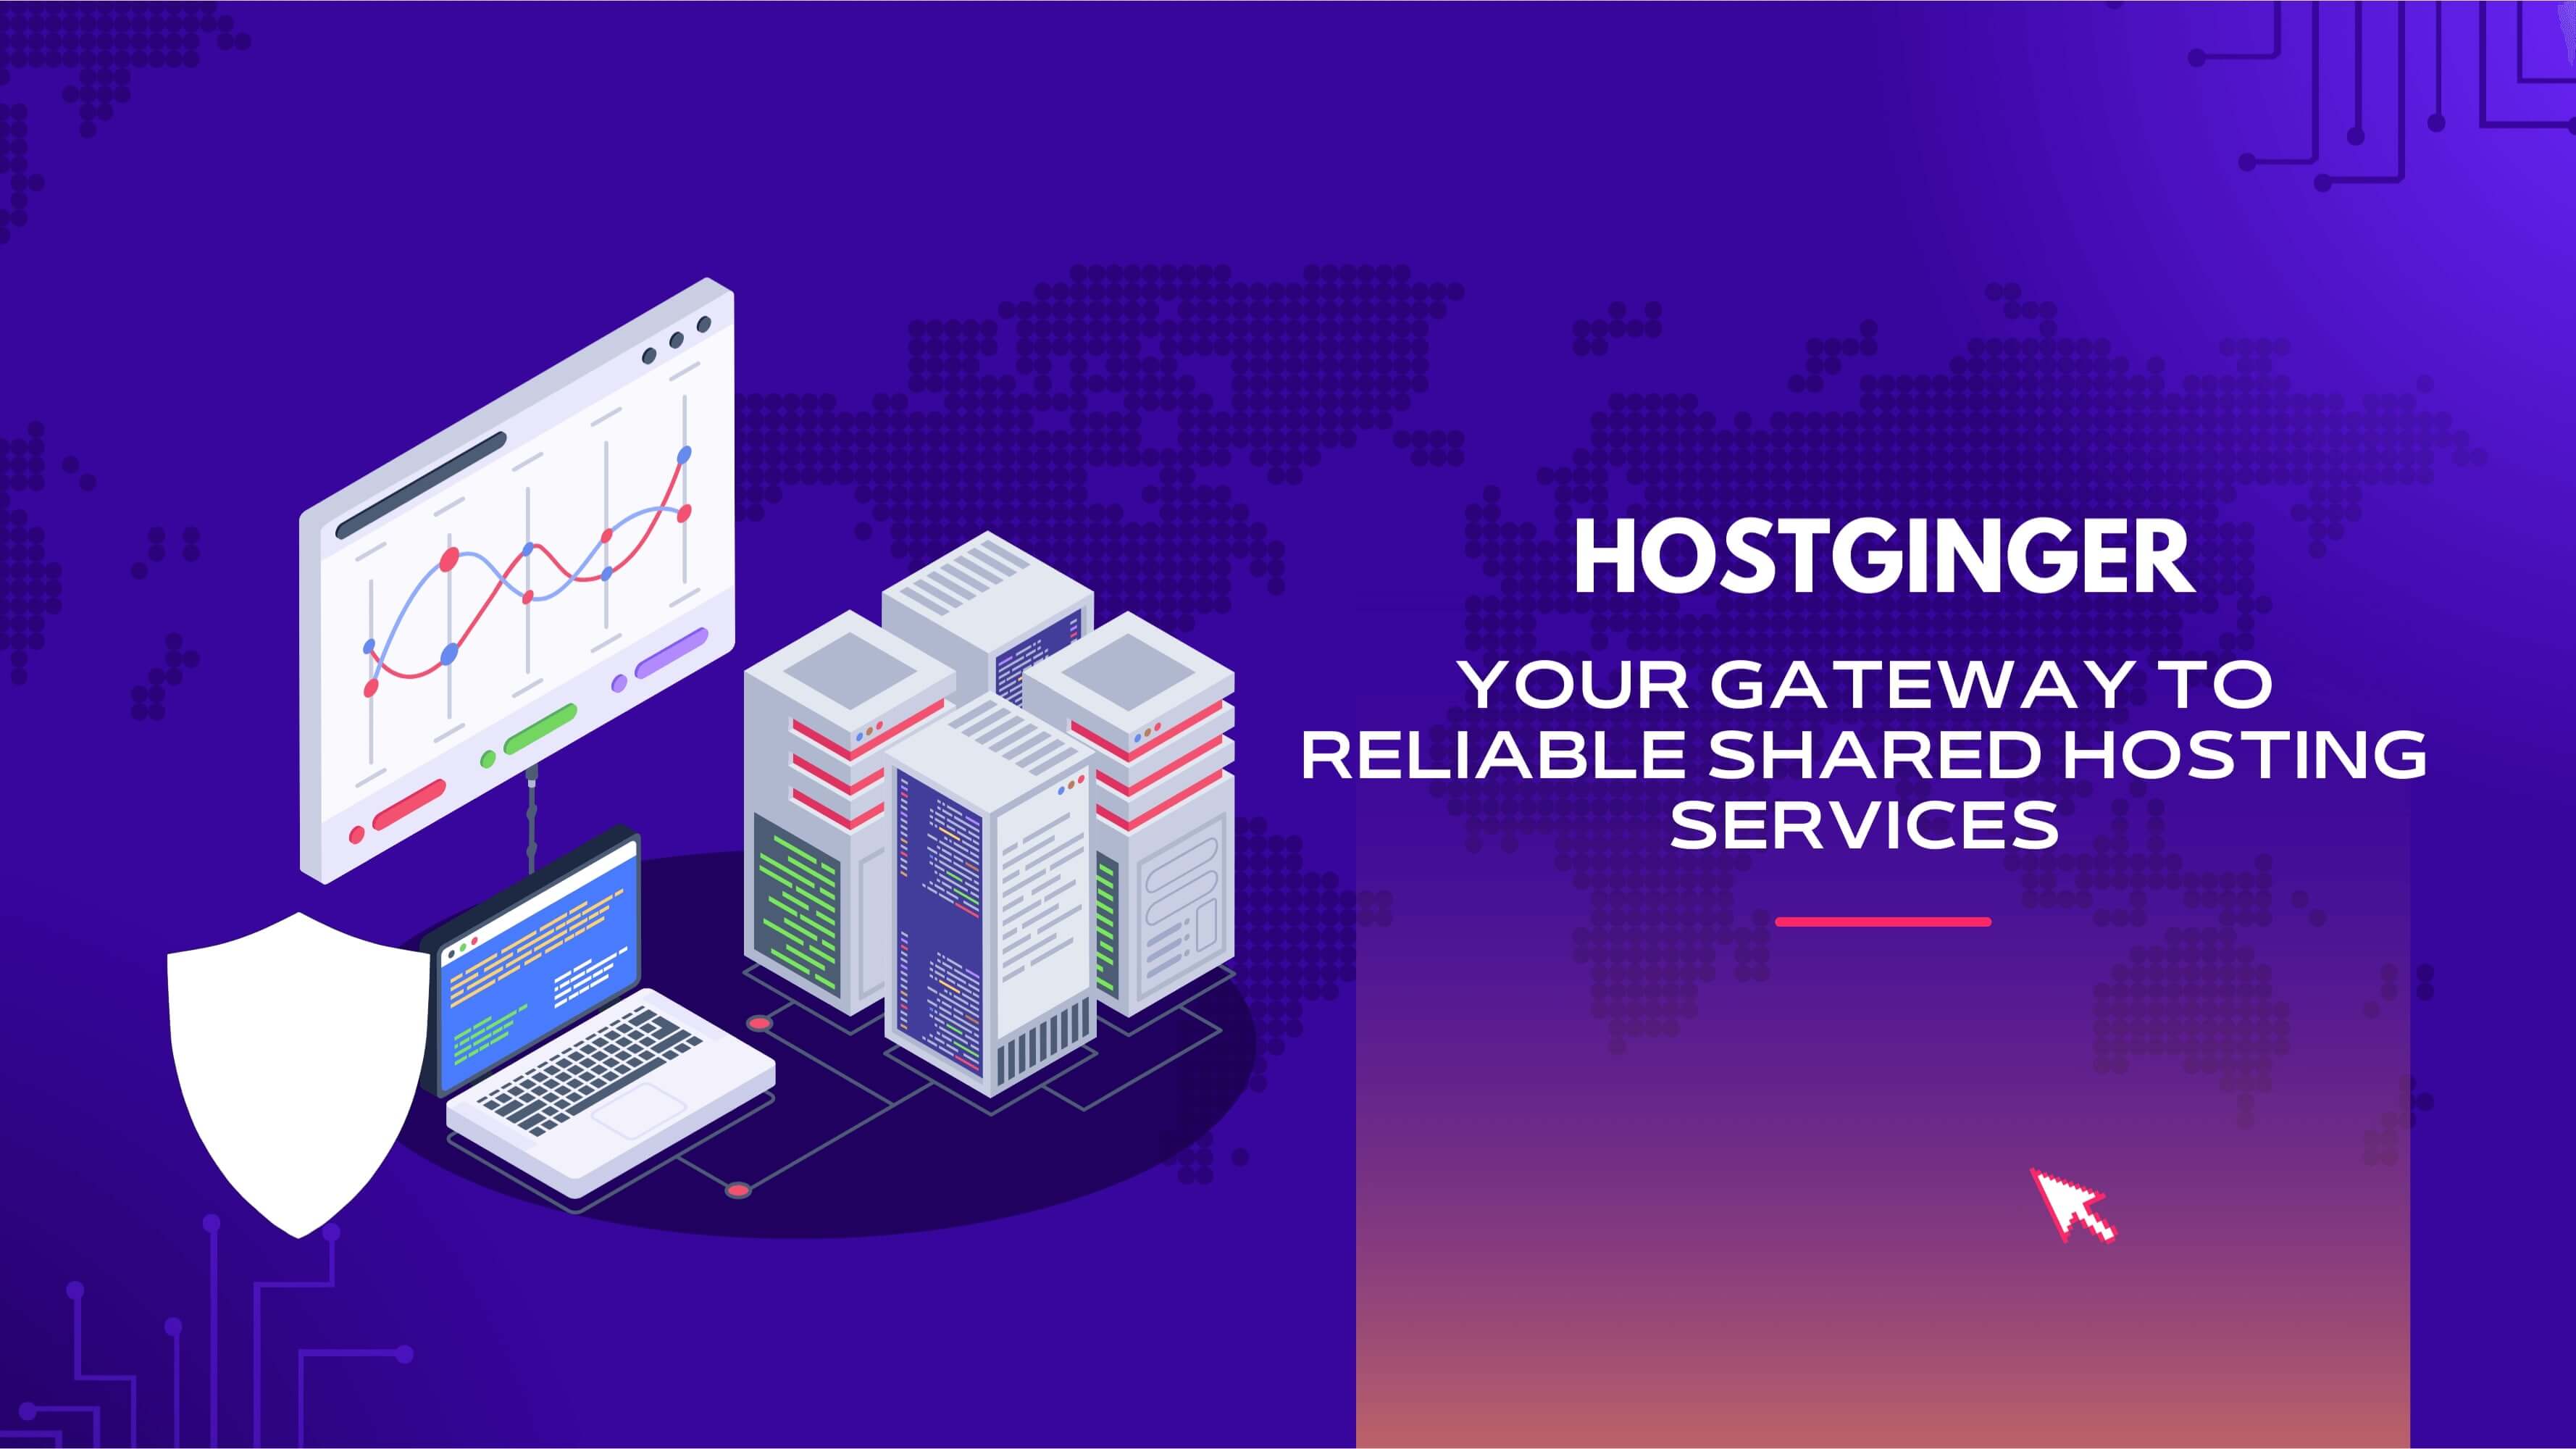 Your Gateway to Reliable Shared Hosting Services